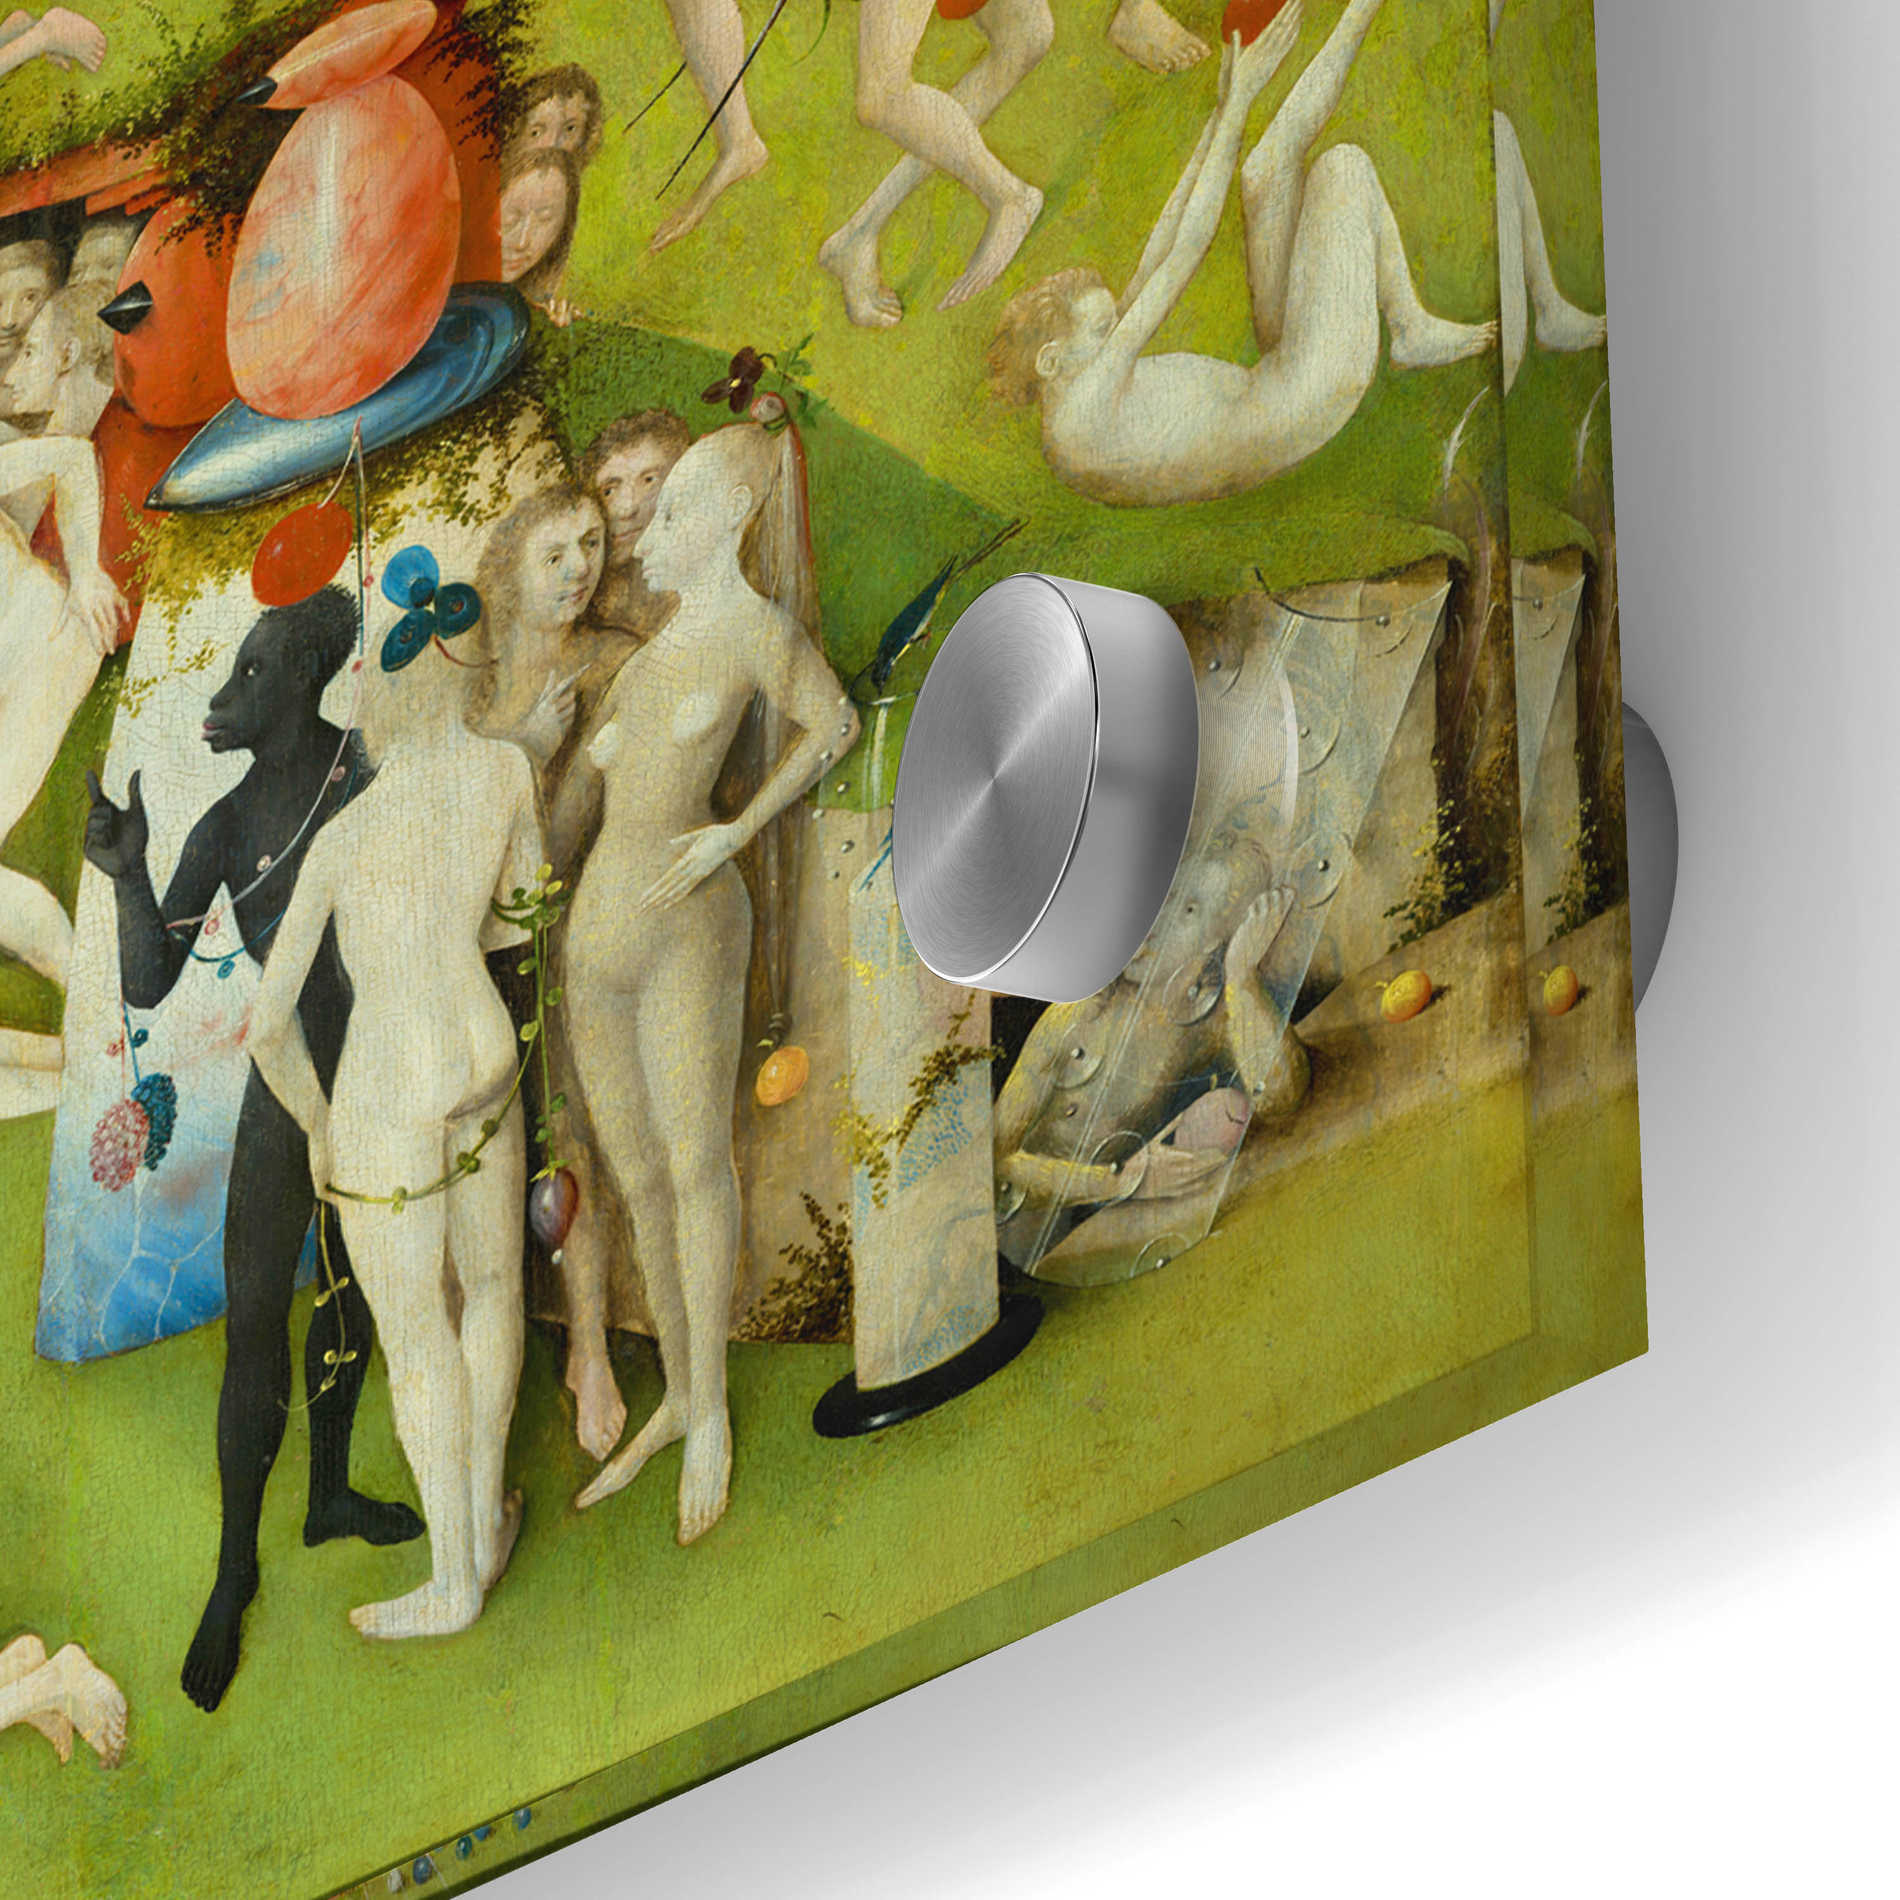 Epic Art 'The Garden of Earthly Delights - Center Panel' by Hieronymus Bosch, Acrylic Glass Wall Art,24x24